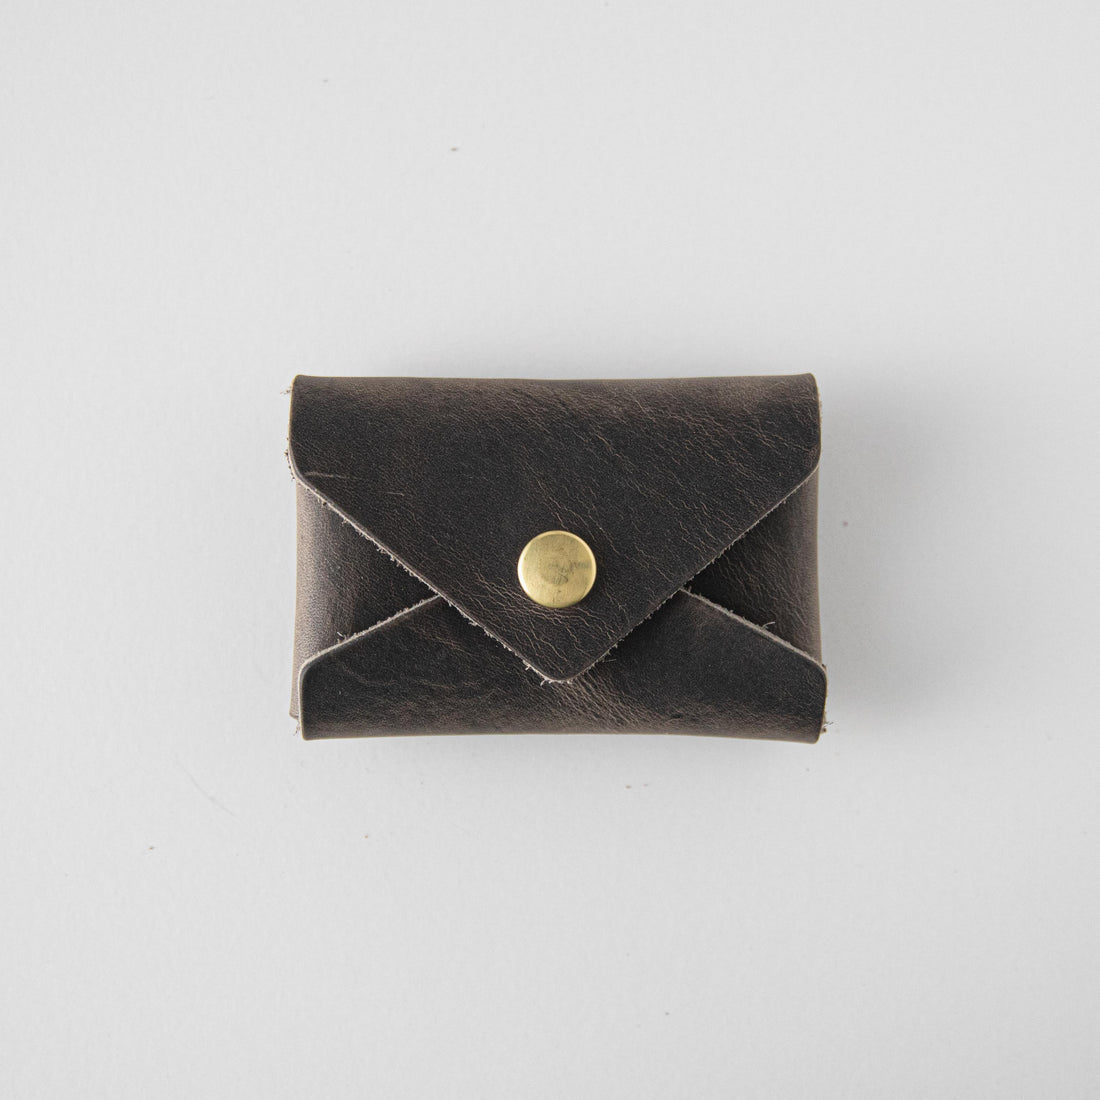 Storm Grey Card Envelope- card holder wallet - leather wallet made in America at KMM &amp; Co.